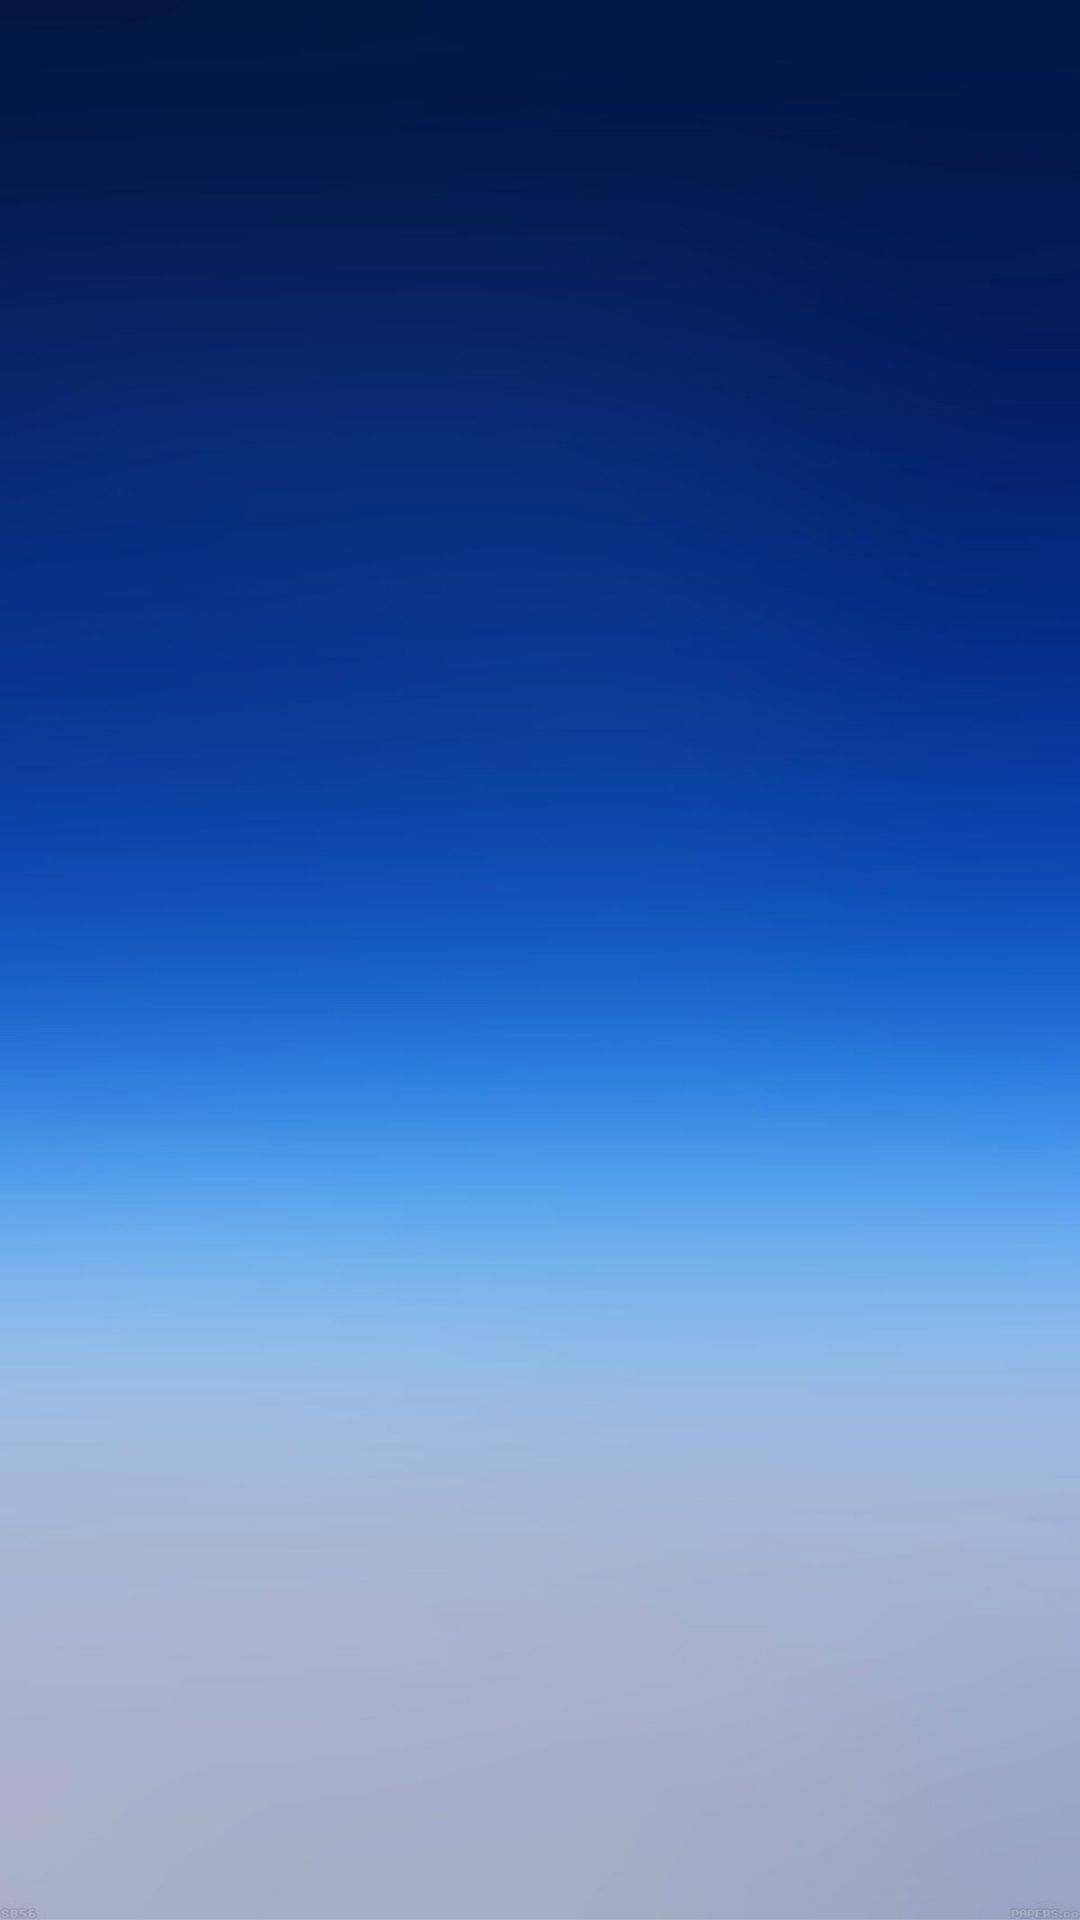 Abstract Pure Simple Blue Gradient Color Background Iphone 6 Wallpaper Ilikewallpaper_com